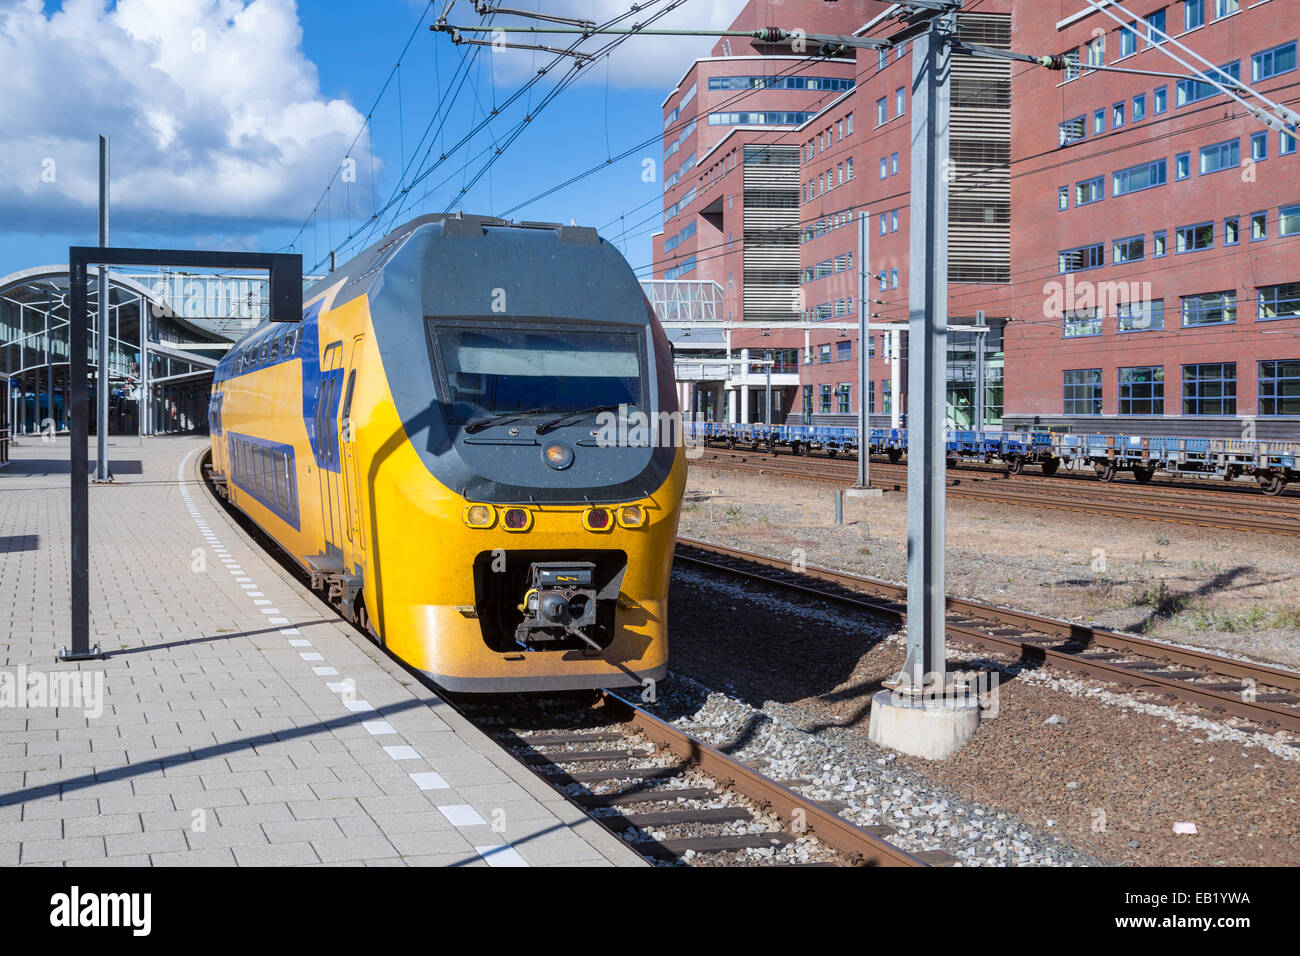 Dutch intercity train leaving the central station of Amersfoort, The Netherlands Stock Photo